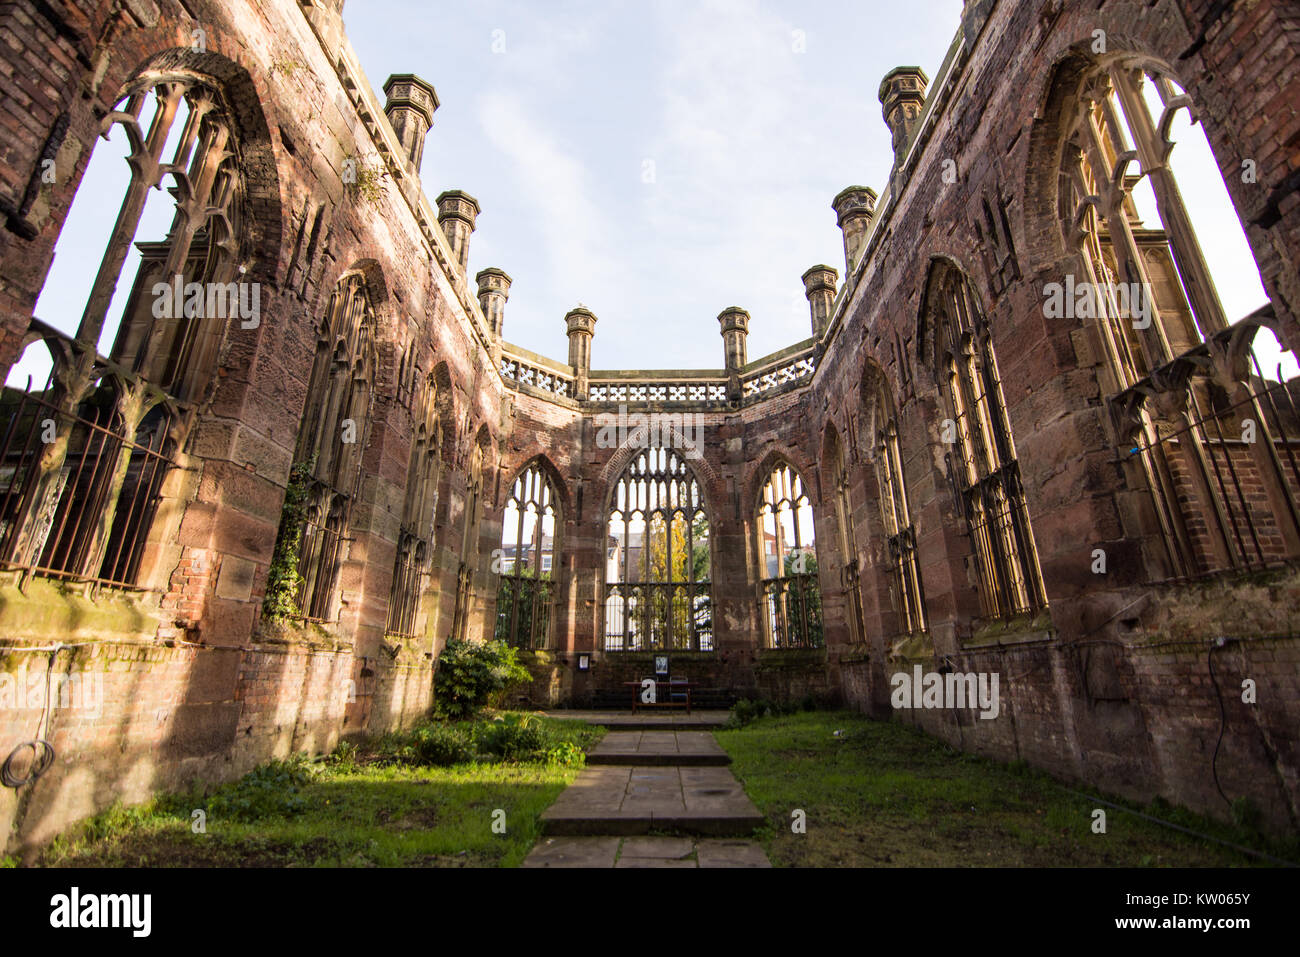 Liverpool, England, UK - November 9, 2017: The ruins of St Luke's Church, known locally as the Bombed Out Church, destroyed during the Blitz of the Se Stock Photo